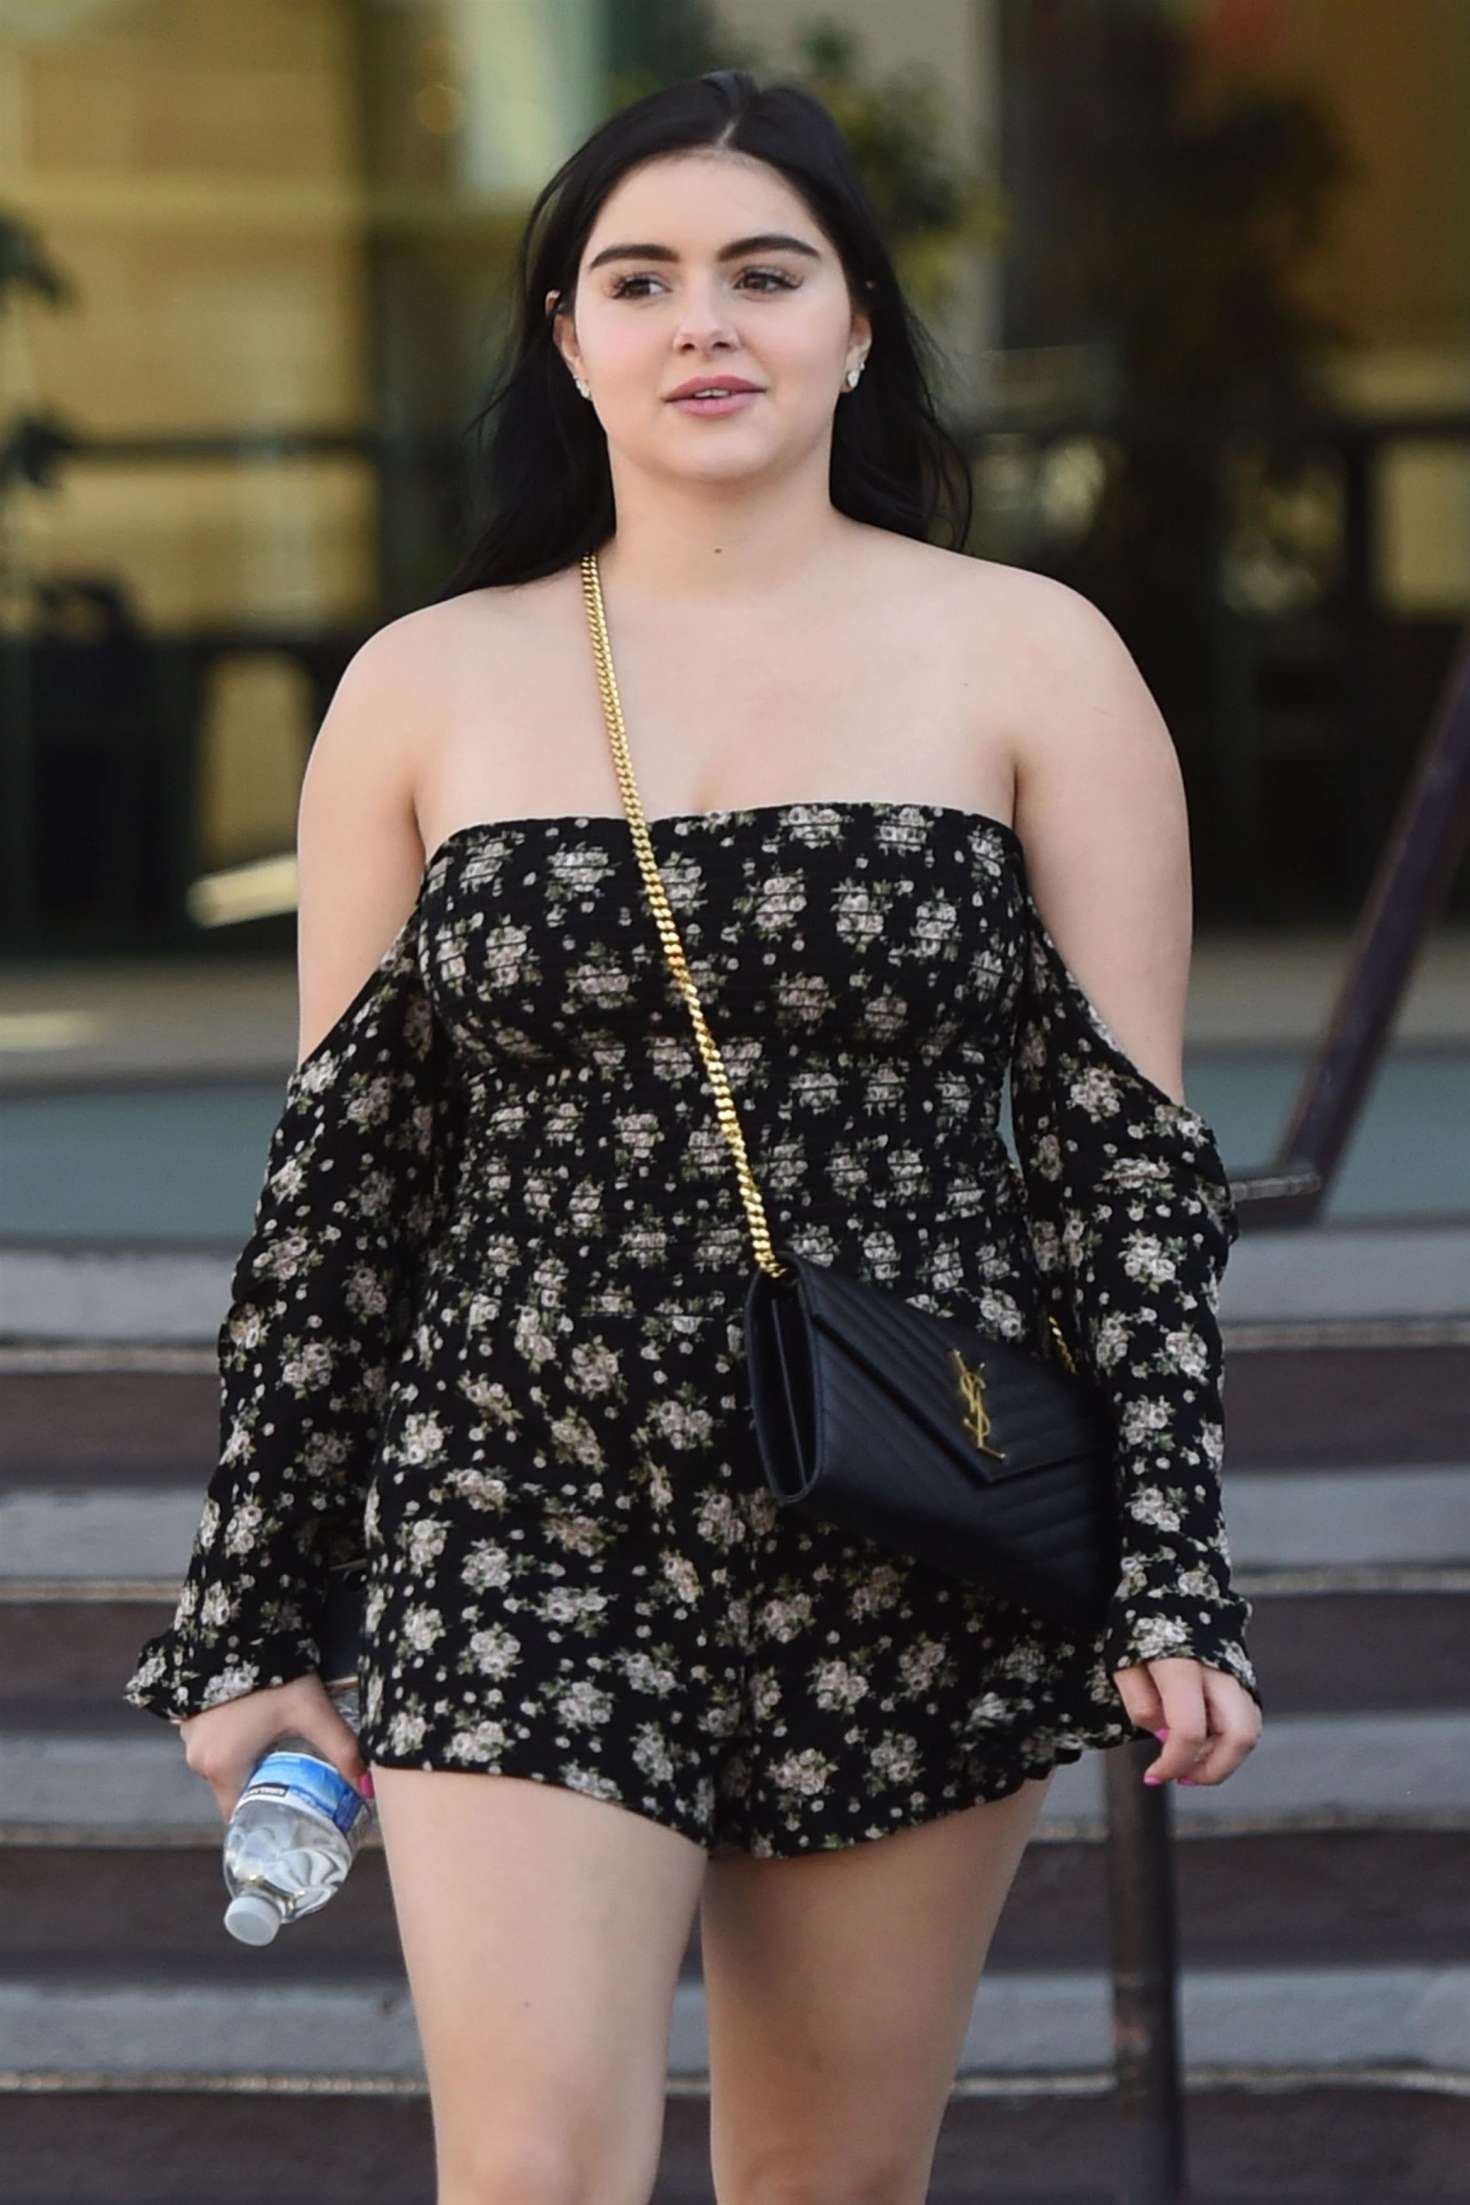 Ariel Winter out for lunch at the Encino Commons in Encino